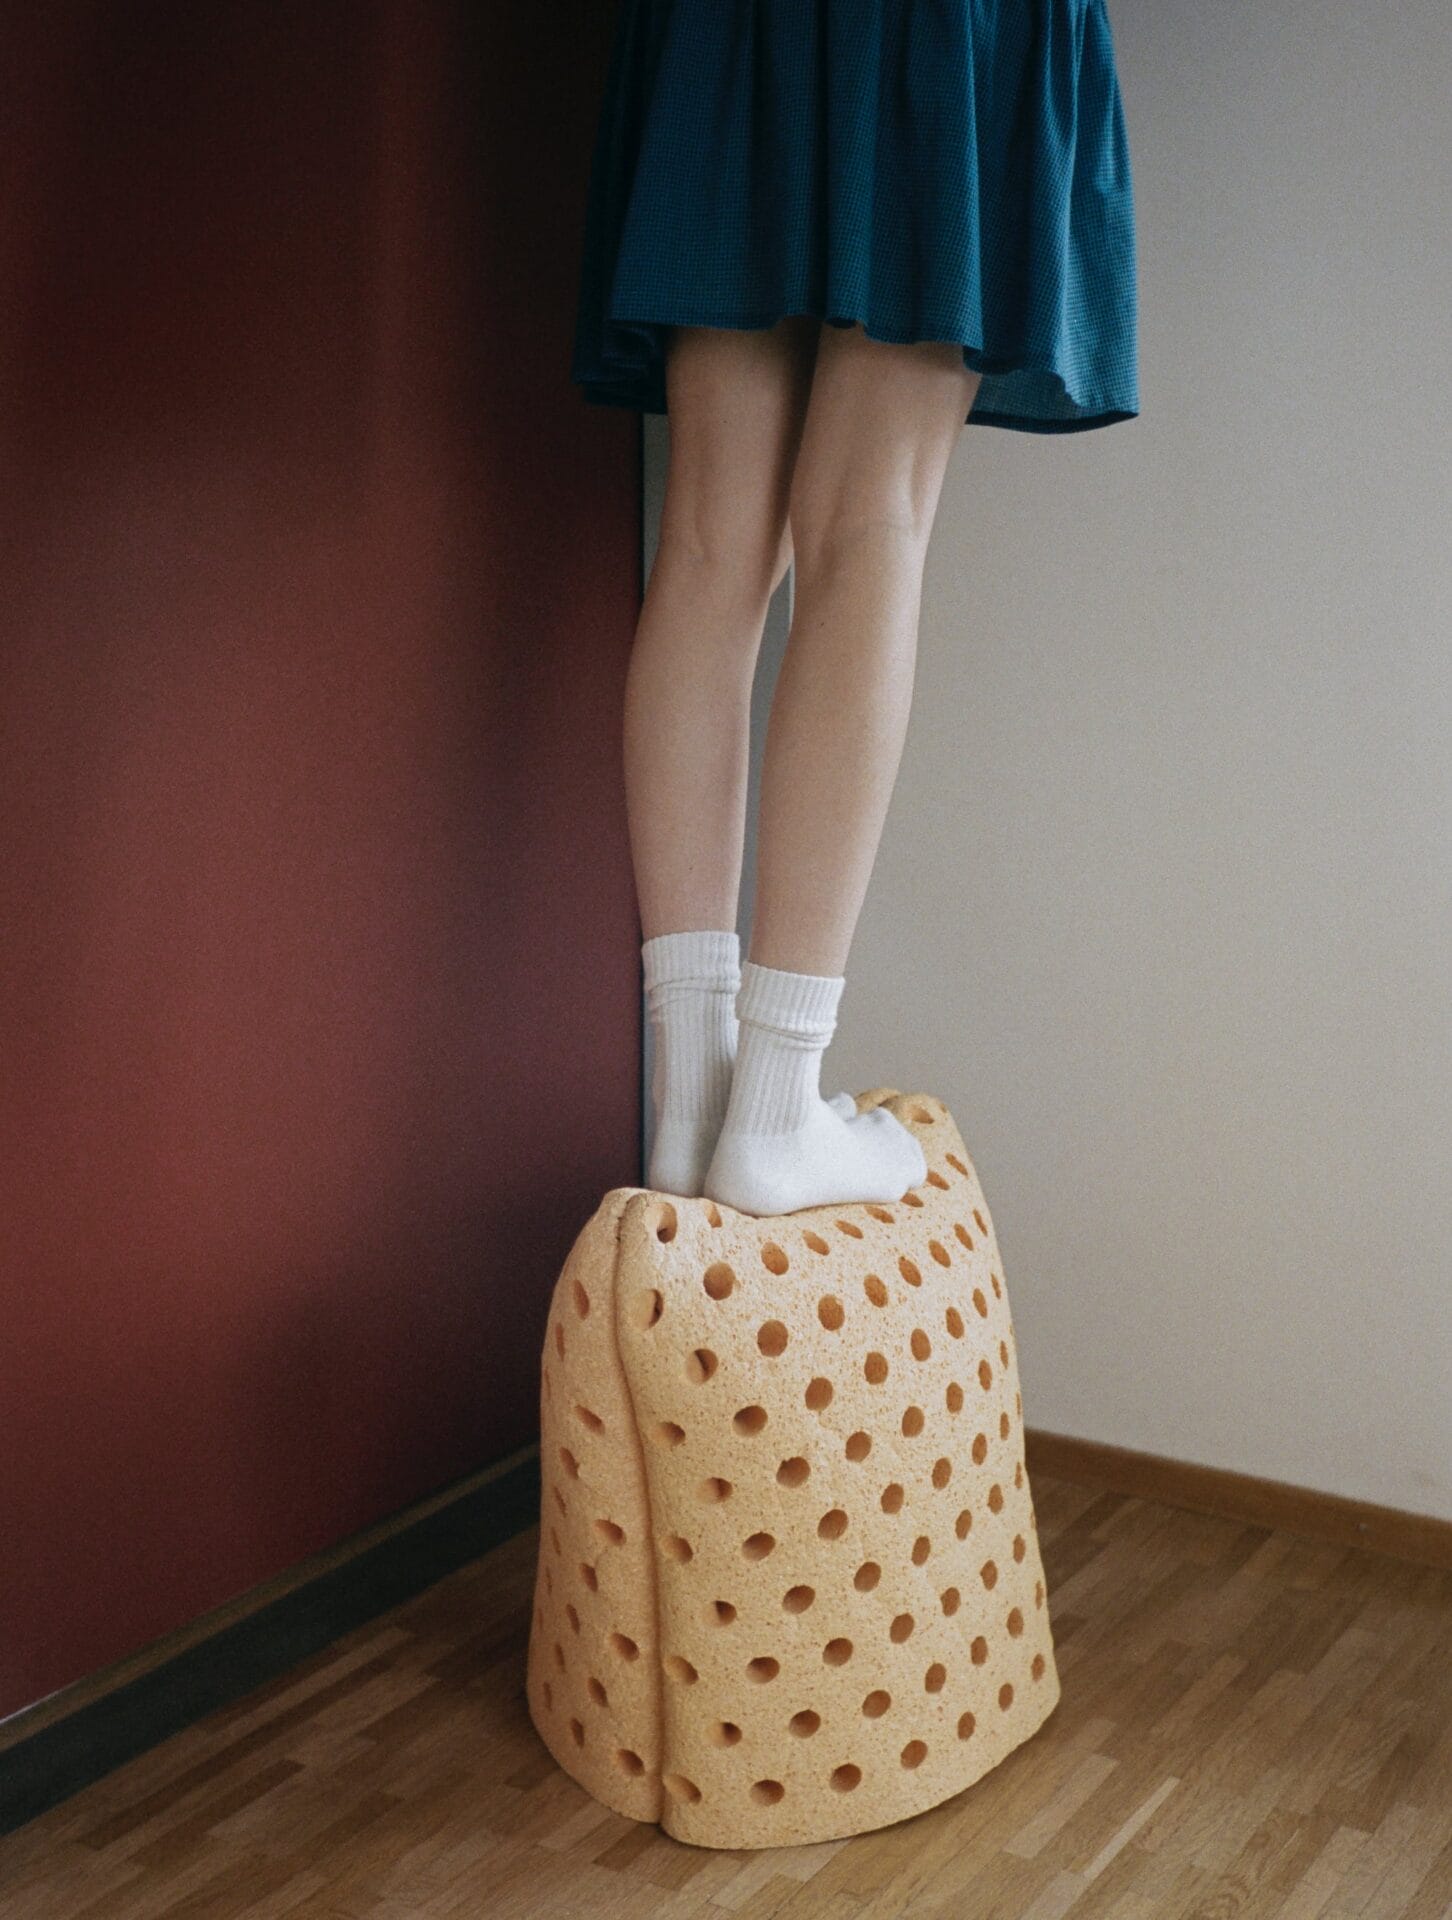 a person stands atop a sponge stool with holes 